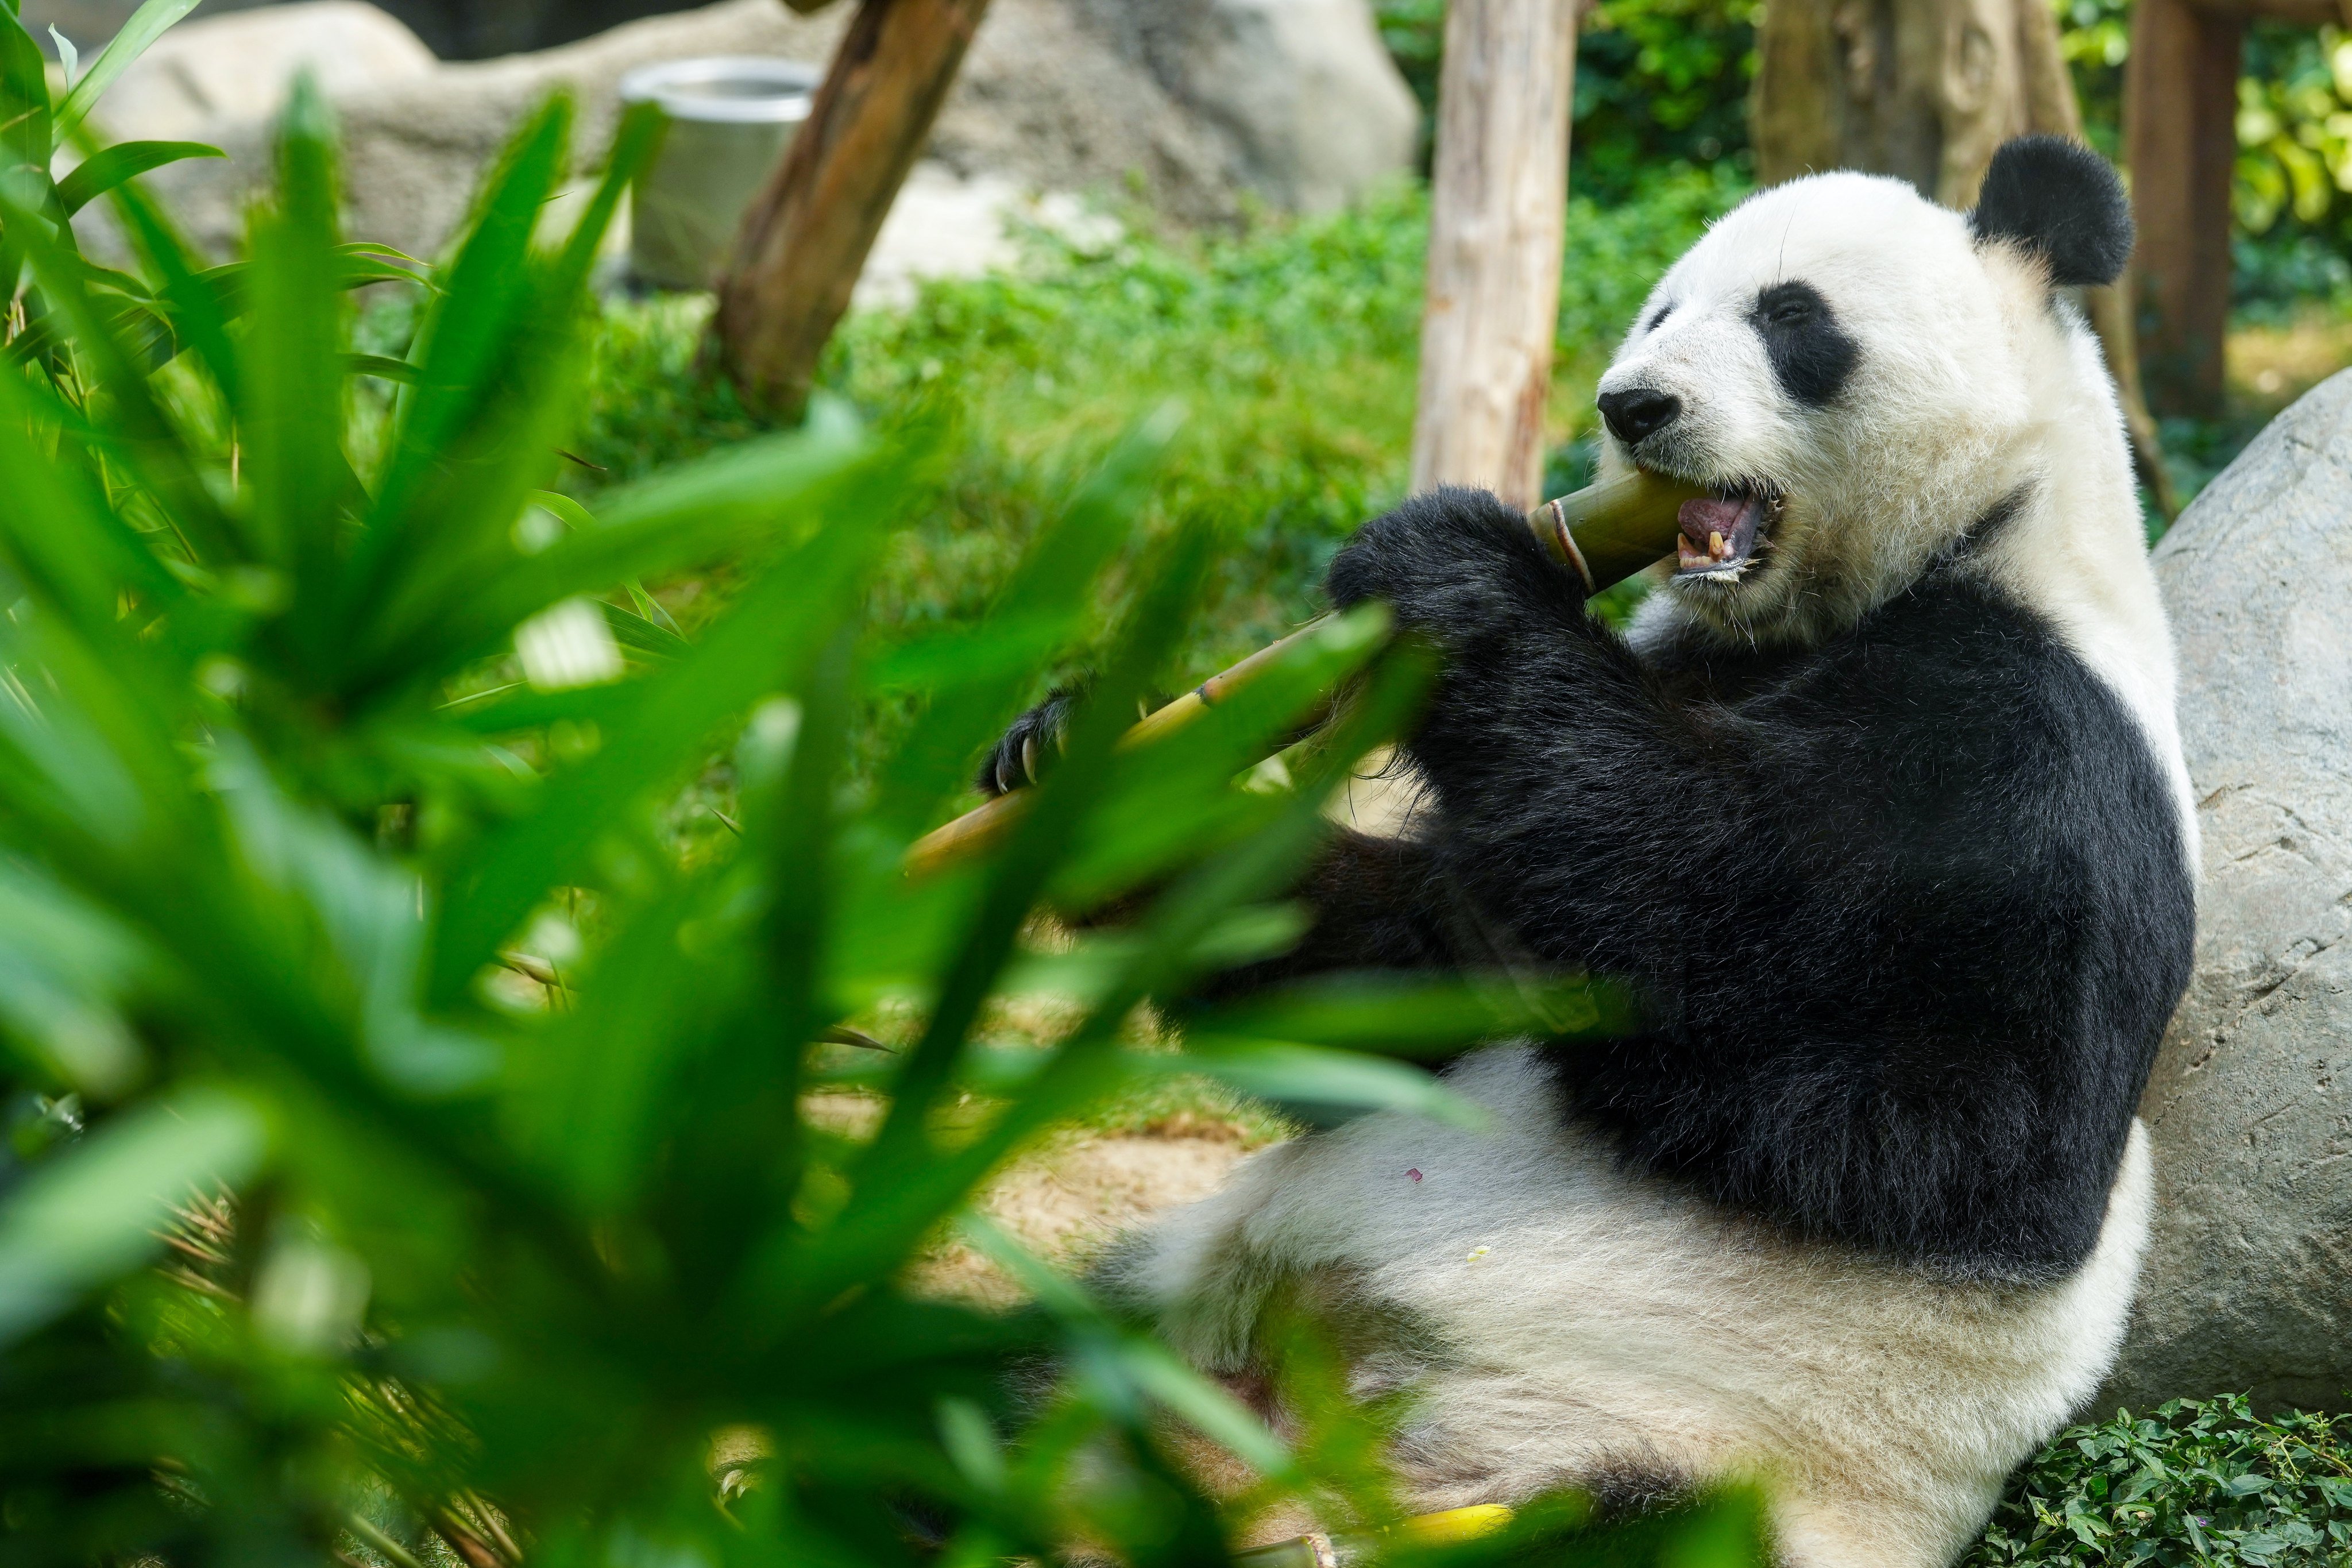 The new pandas will join Ying Ying (pictured) and Le Le at Ocean Park. Photo: Elson Li